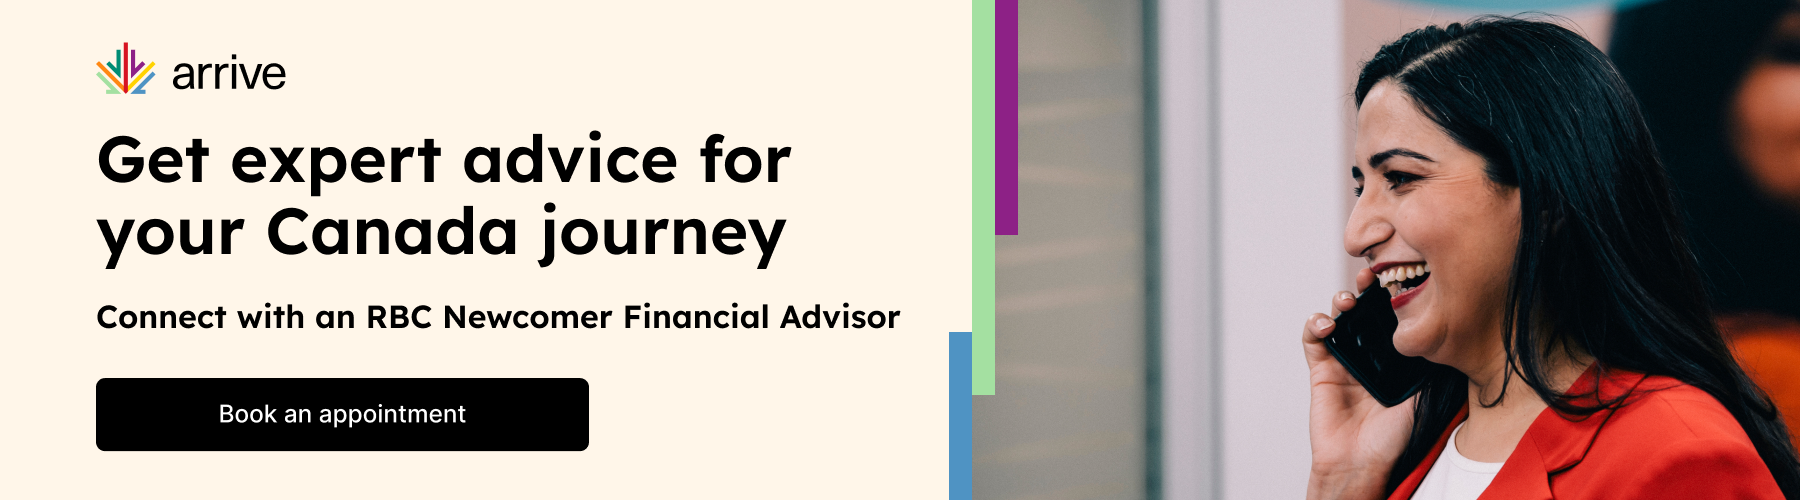 Book an appointment with an RBC Newcomer Financial Advisor